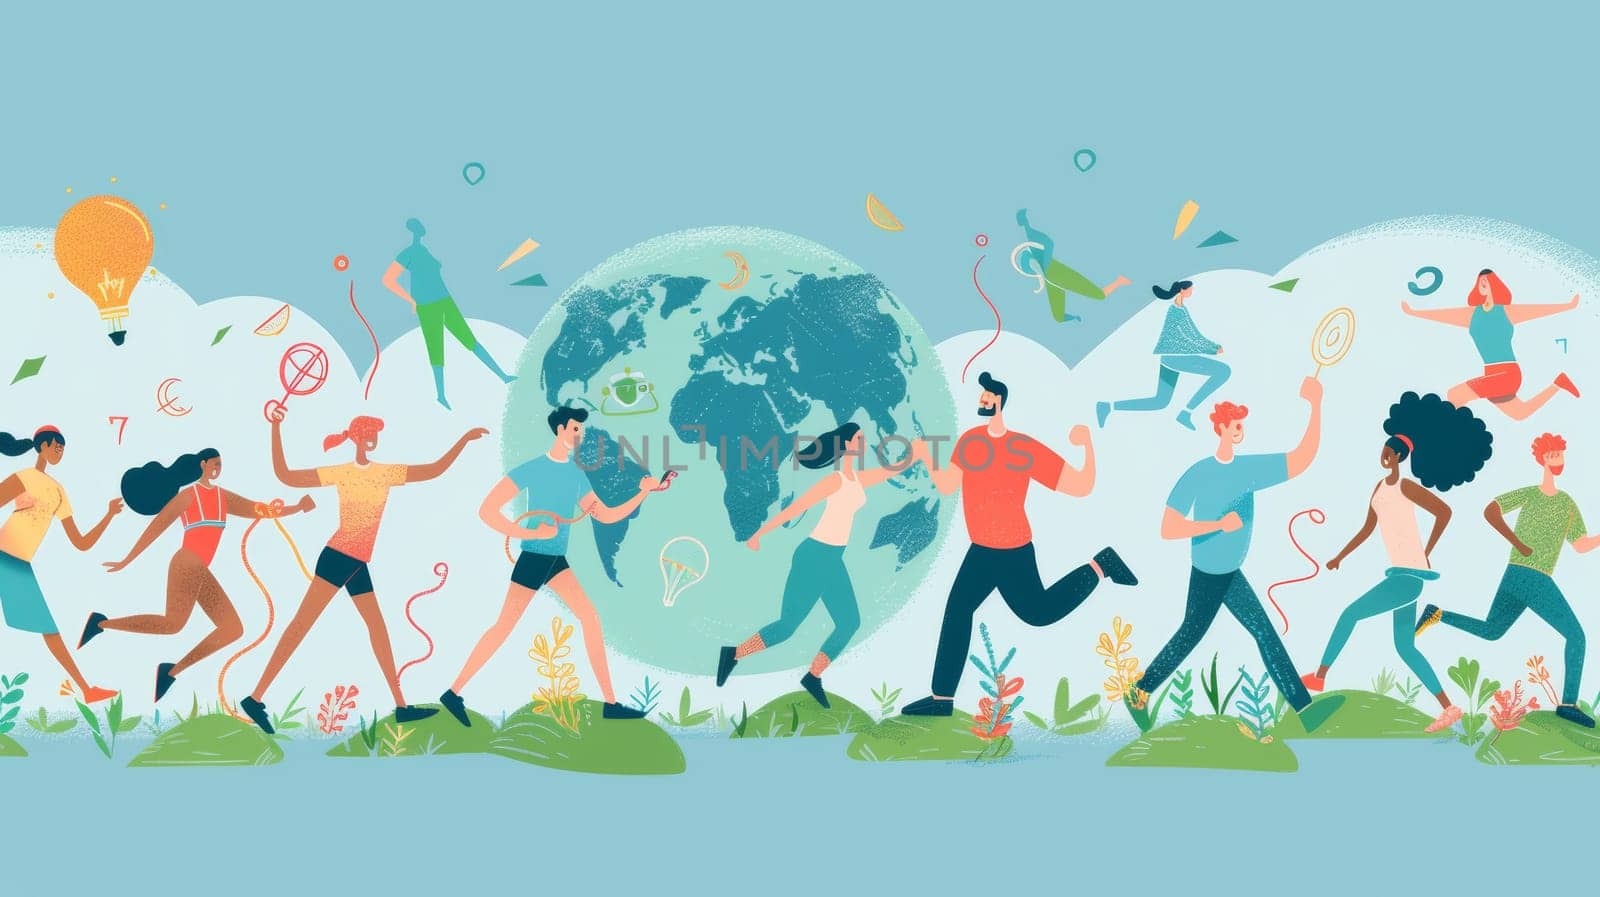 World health day concept, 7 April, modern background. Hand drawn comic style of people exercising and working out. Template for web, banner, campaign, social media posts.